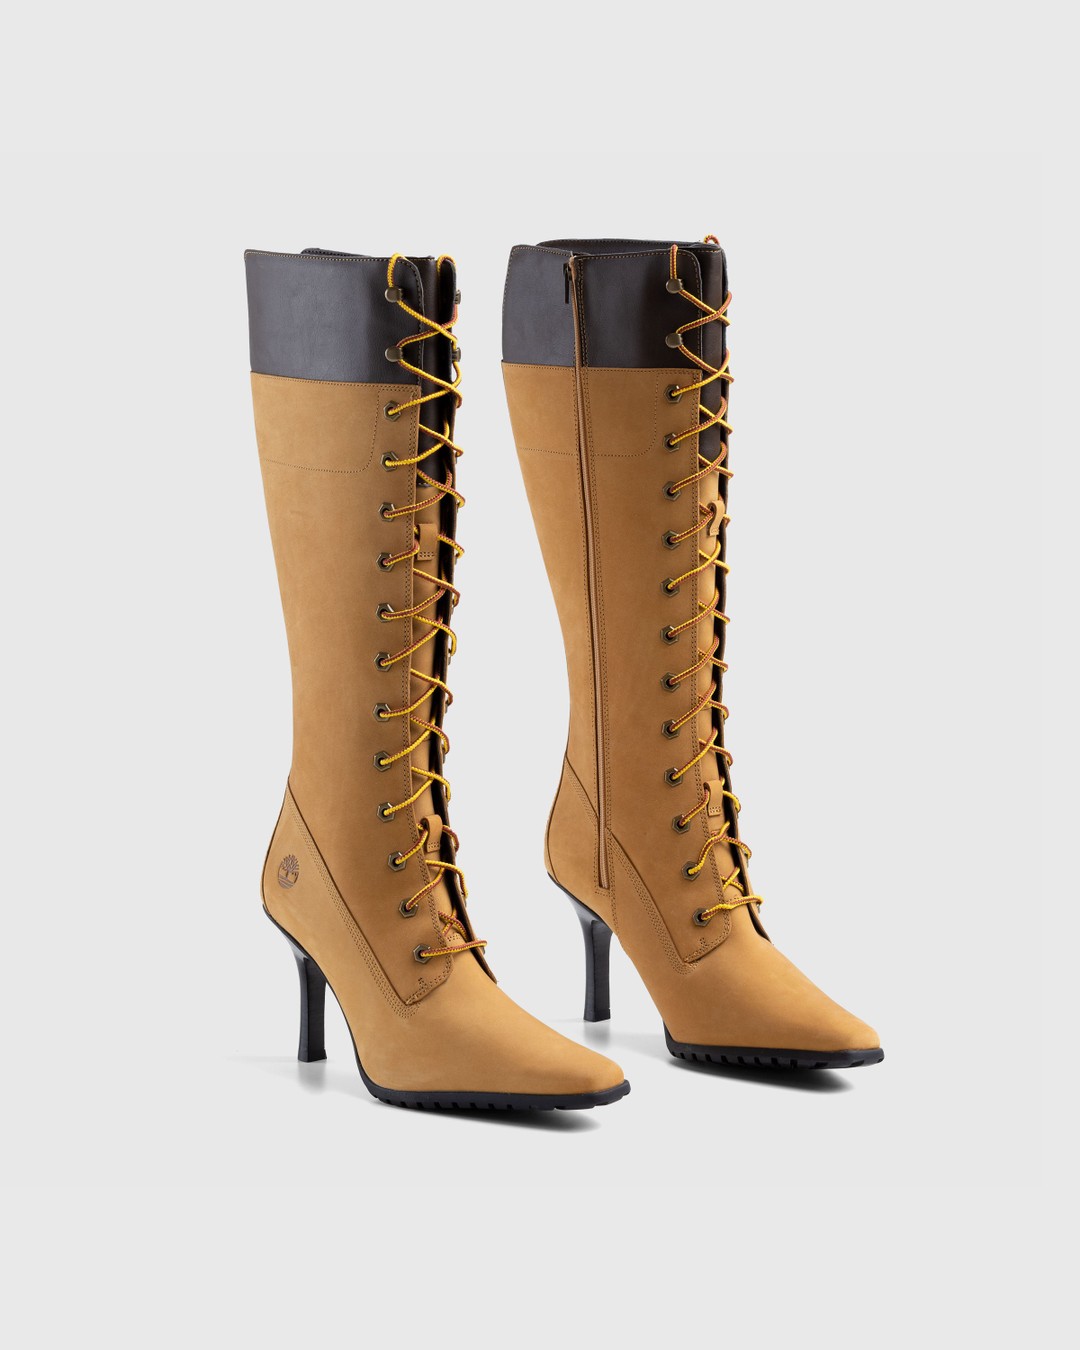 Veneda Carter x Timberland – Tall Lace Boot Yellow - Boots - Brown - Image 3